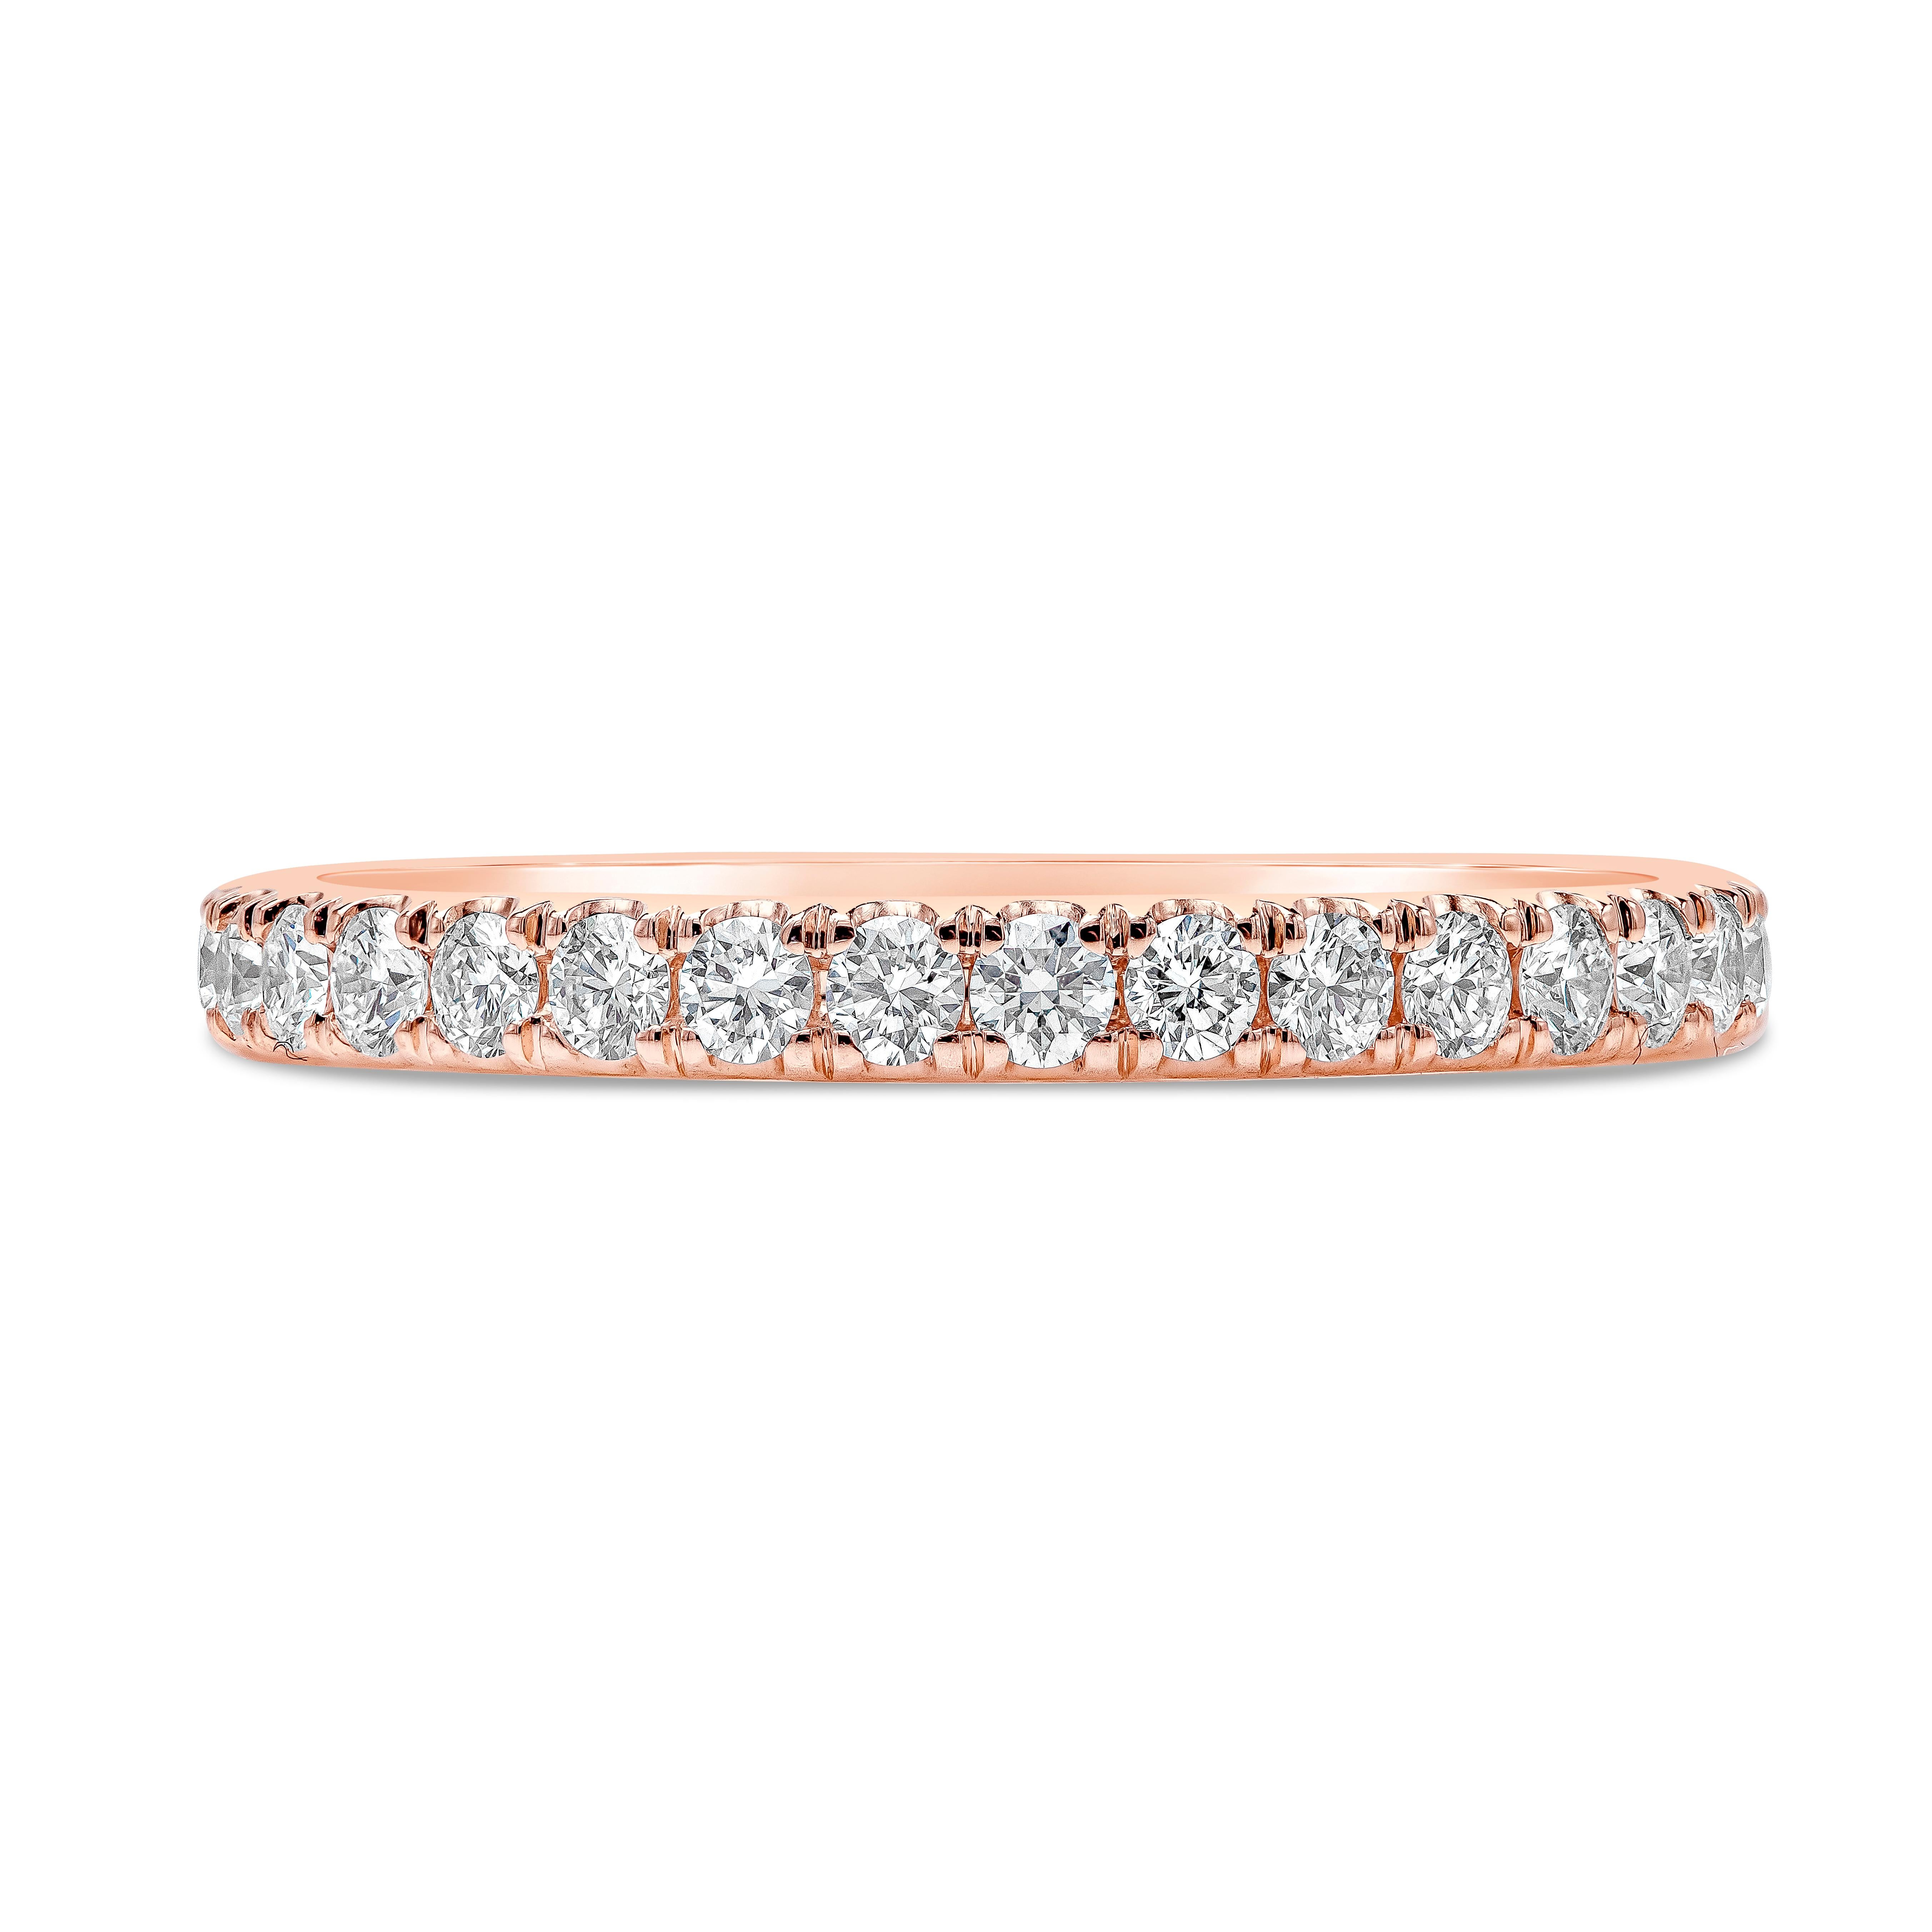 A timeless eternity wedding band style showcasing a row of round brilliant diamonds weighing 0.55 carats total, set in a scalloped-pave setting, Made in 18K Rose Gold. Size 6 US resizable upon request.

Roman Malakov is a custom house, specializing